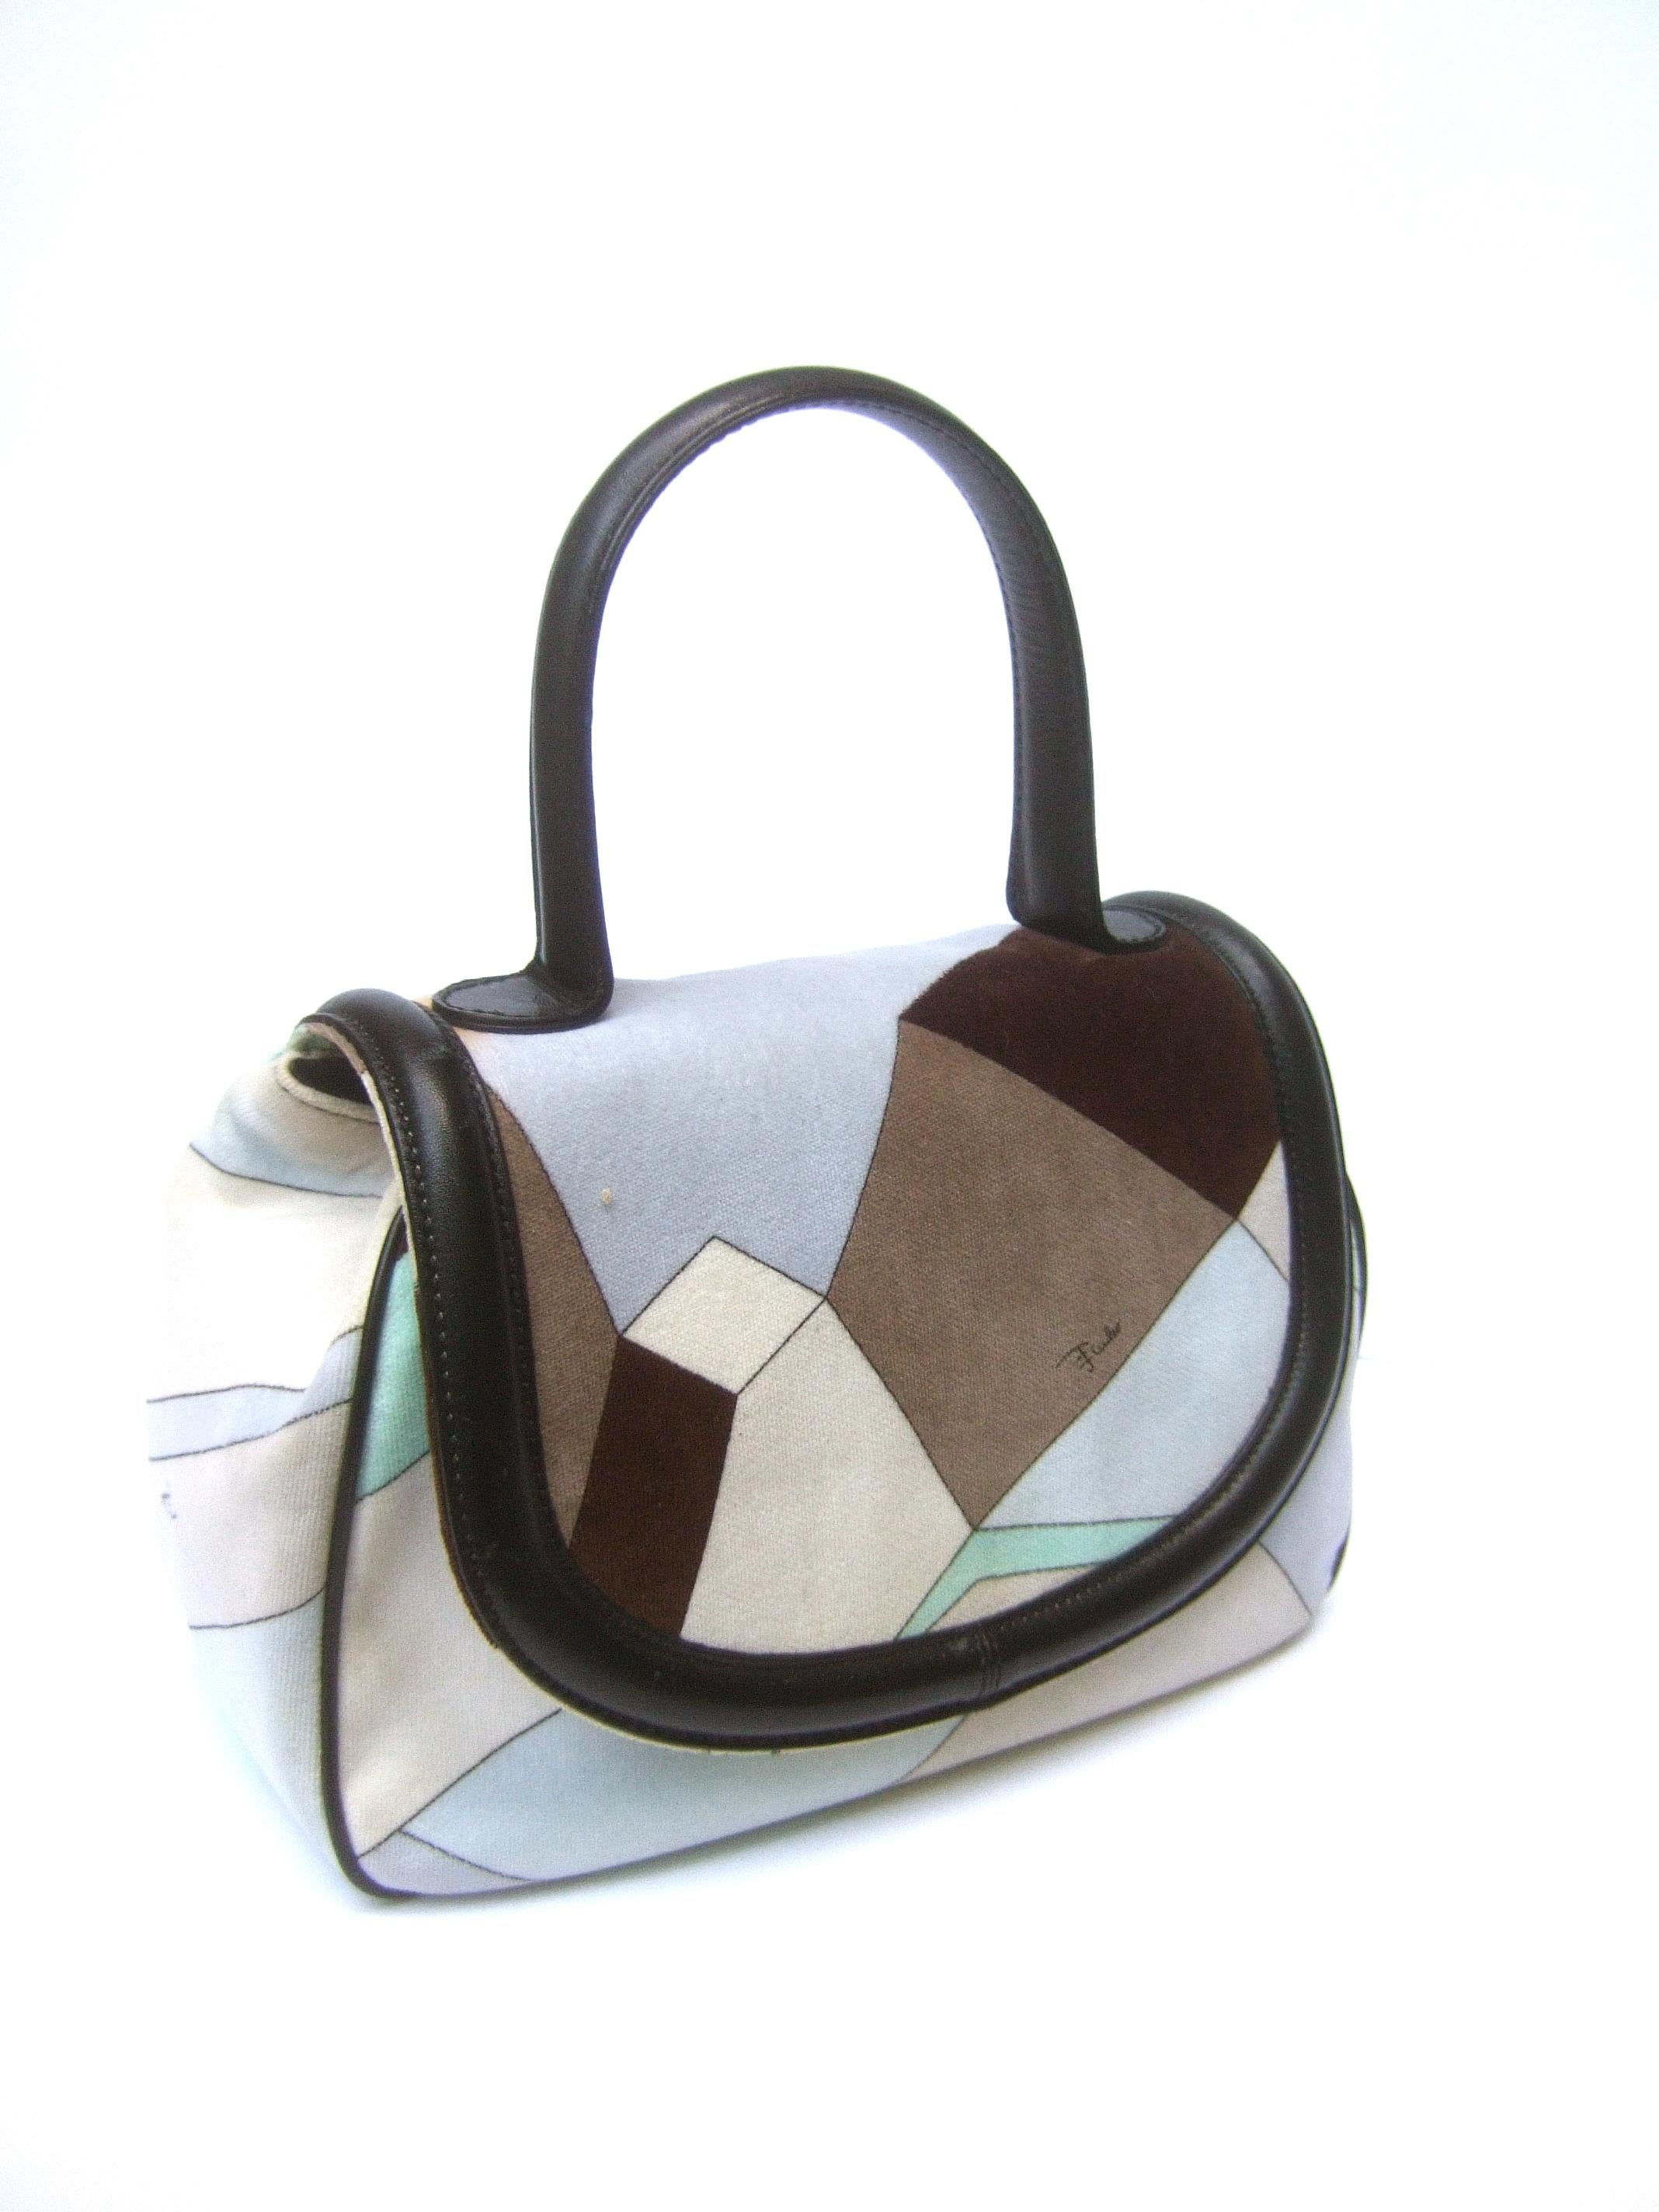 Emilio Pucci Mod velvet print leather trim Italian handbag circa 21st c 
The stylish Italian handbag is covered with bold geometric graphic
designs in a myriad of colors; pale blue, aqua blue, mocha & chocolate
brown

The handle is constructed with